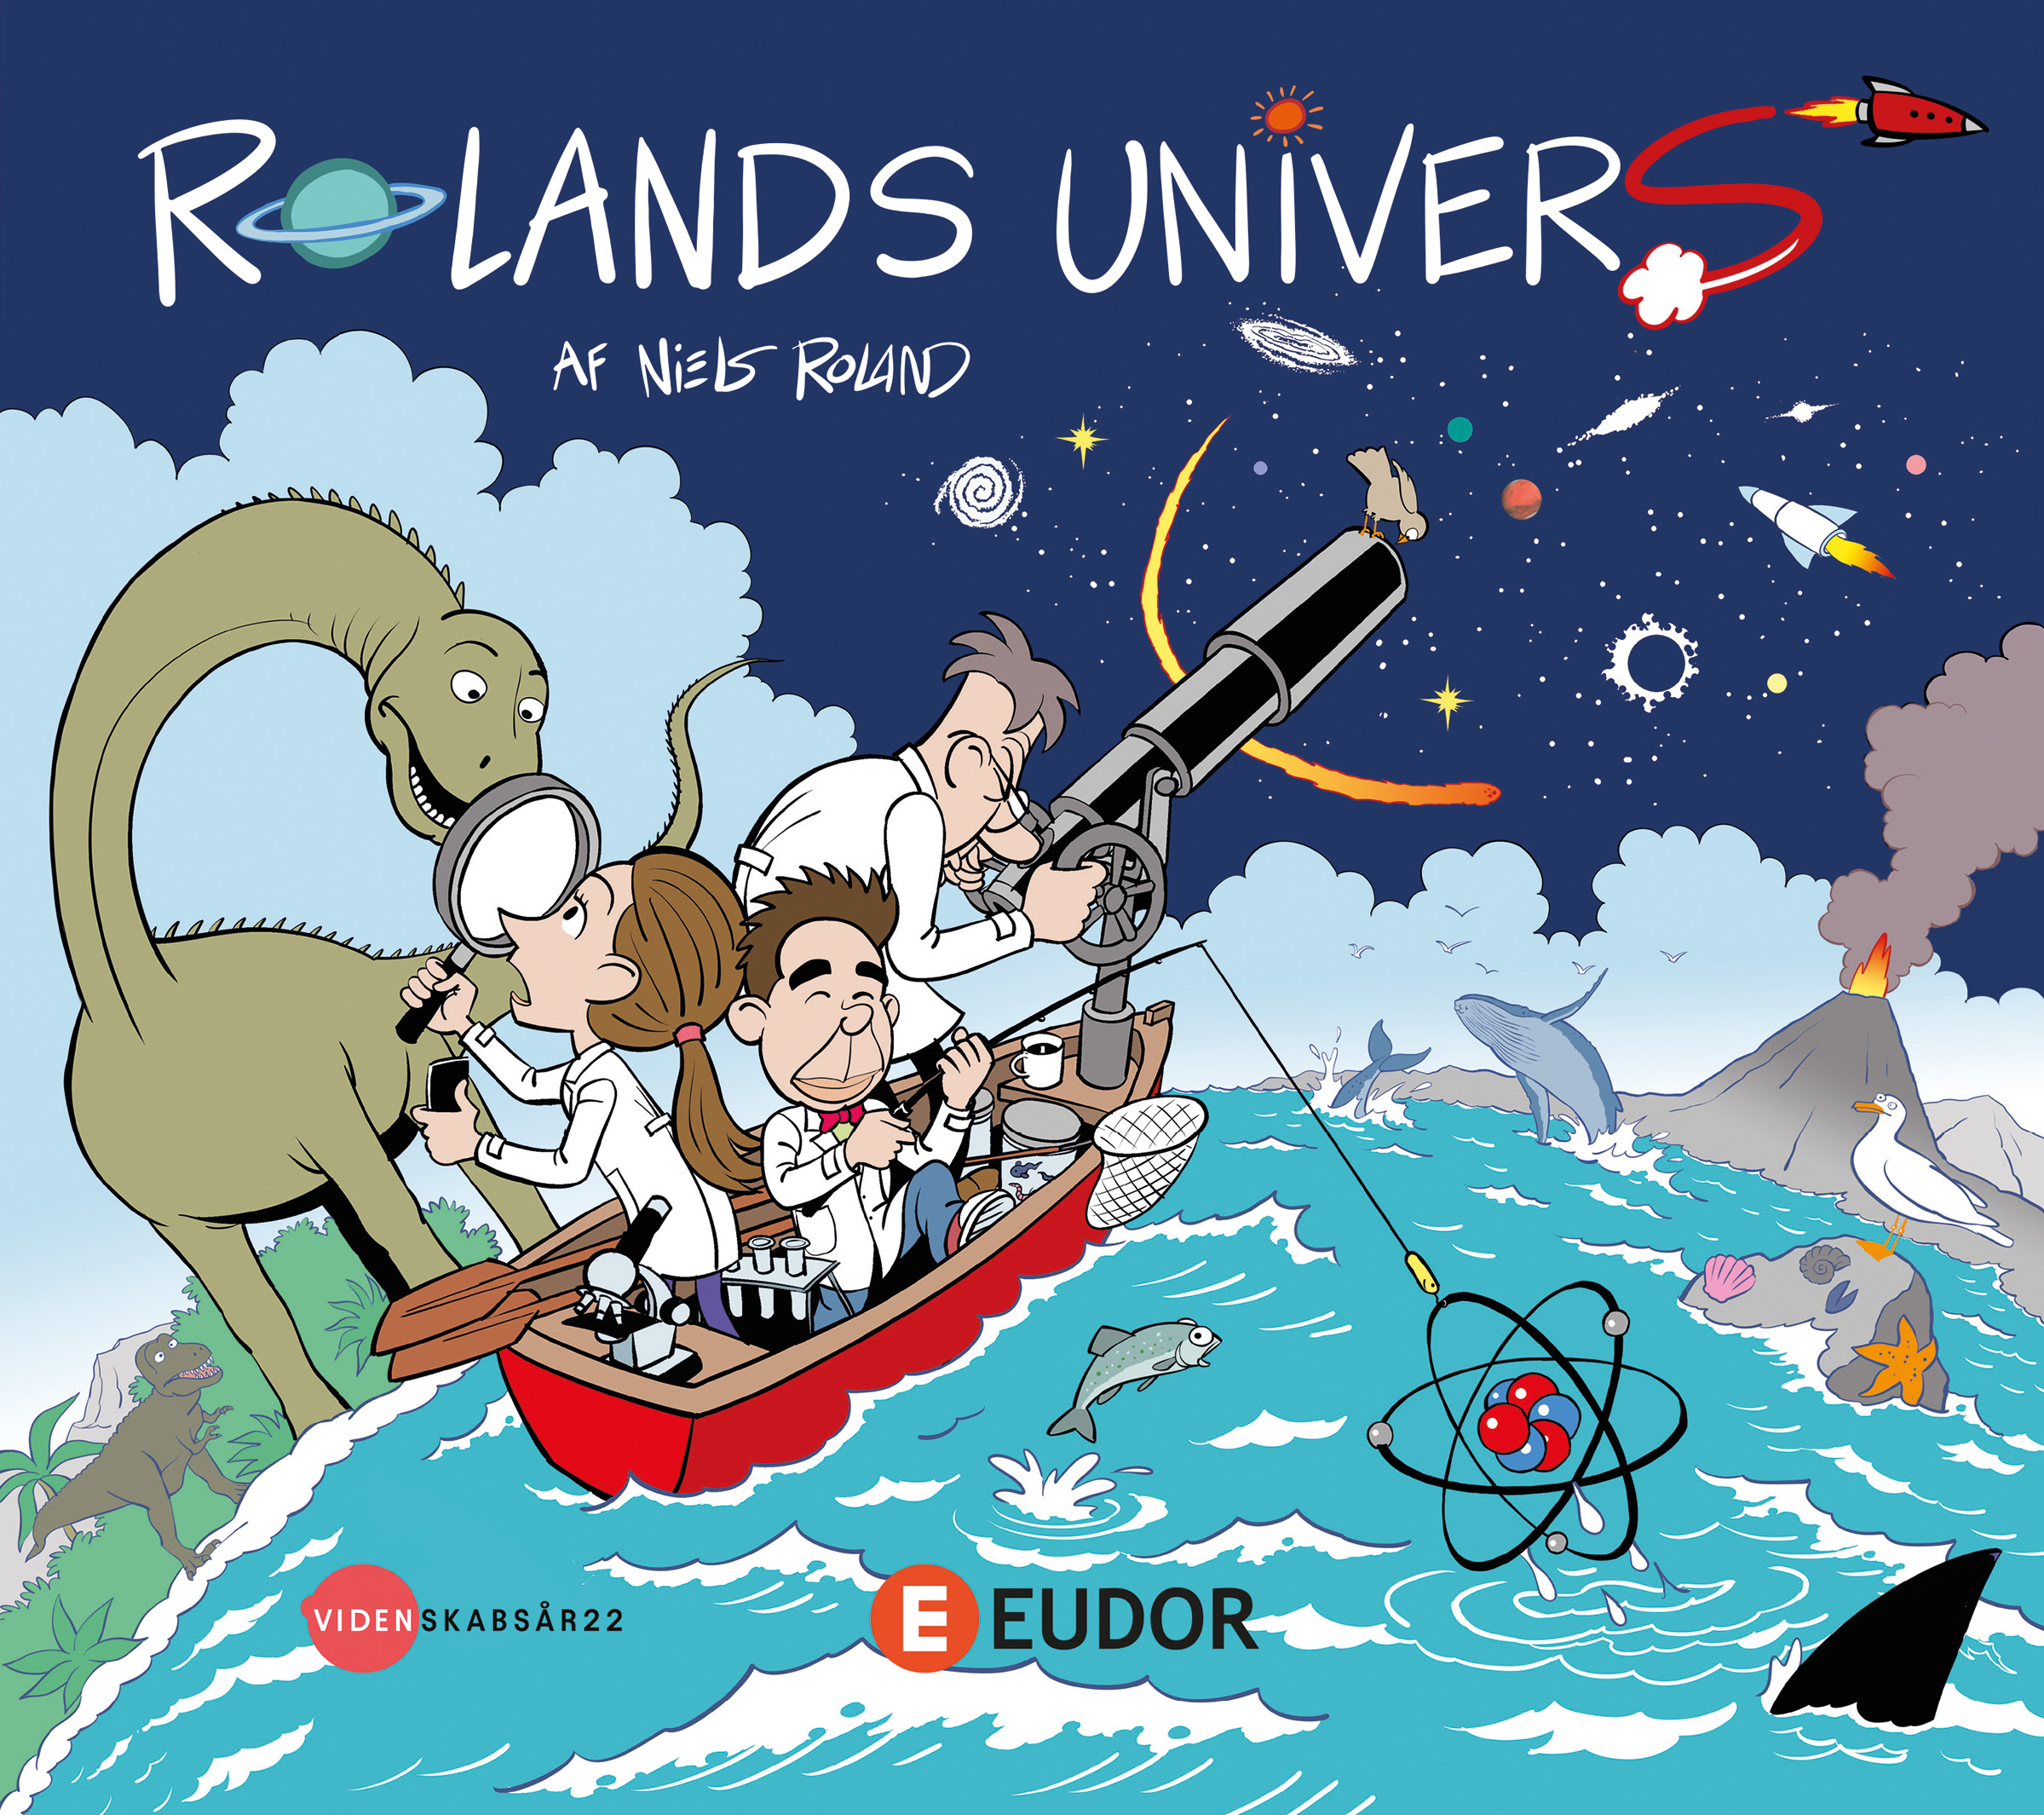 Roland's universe by Niels Roland